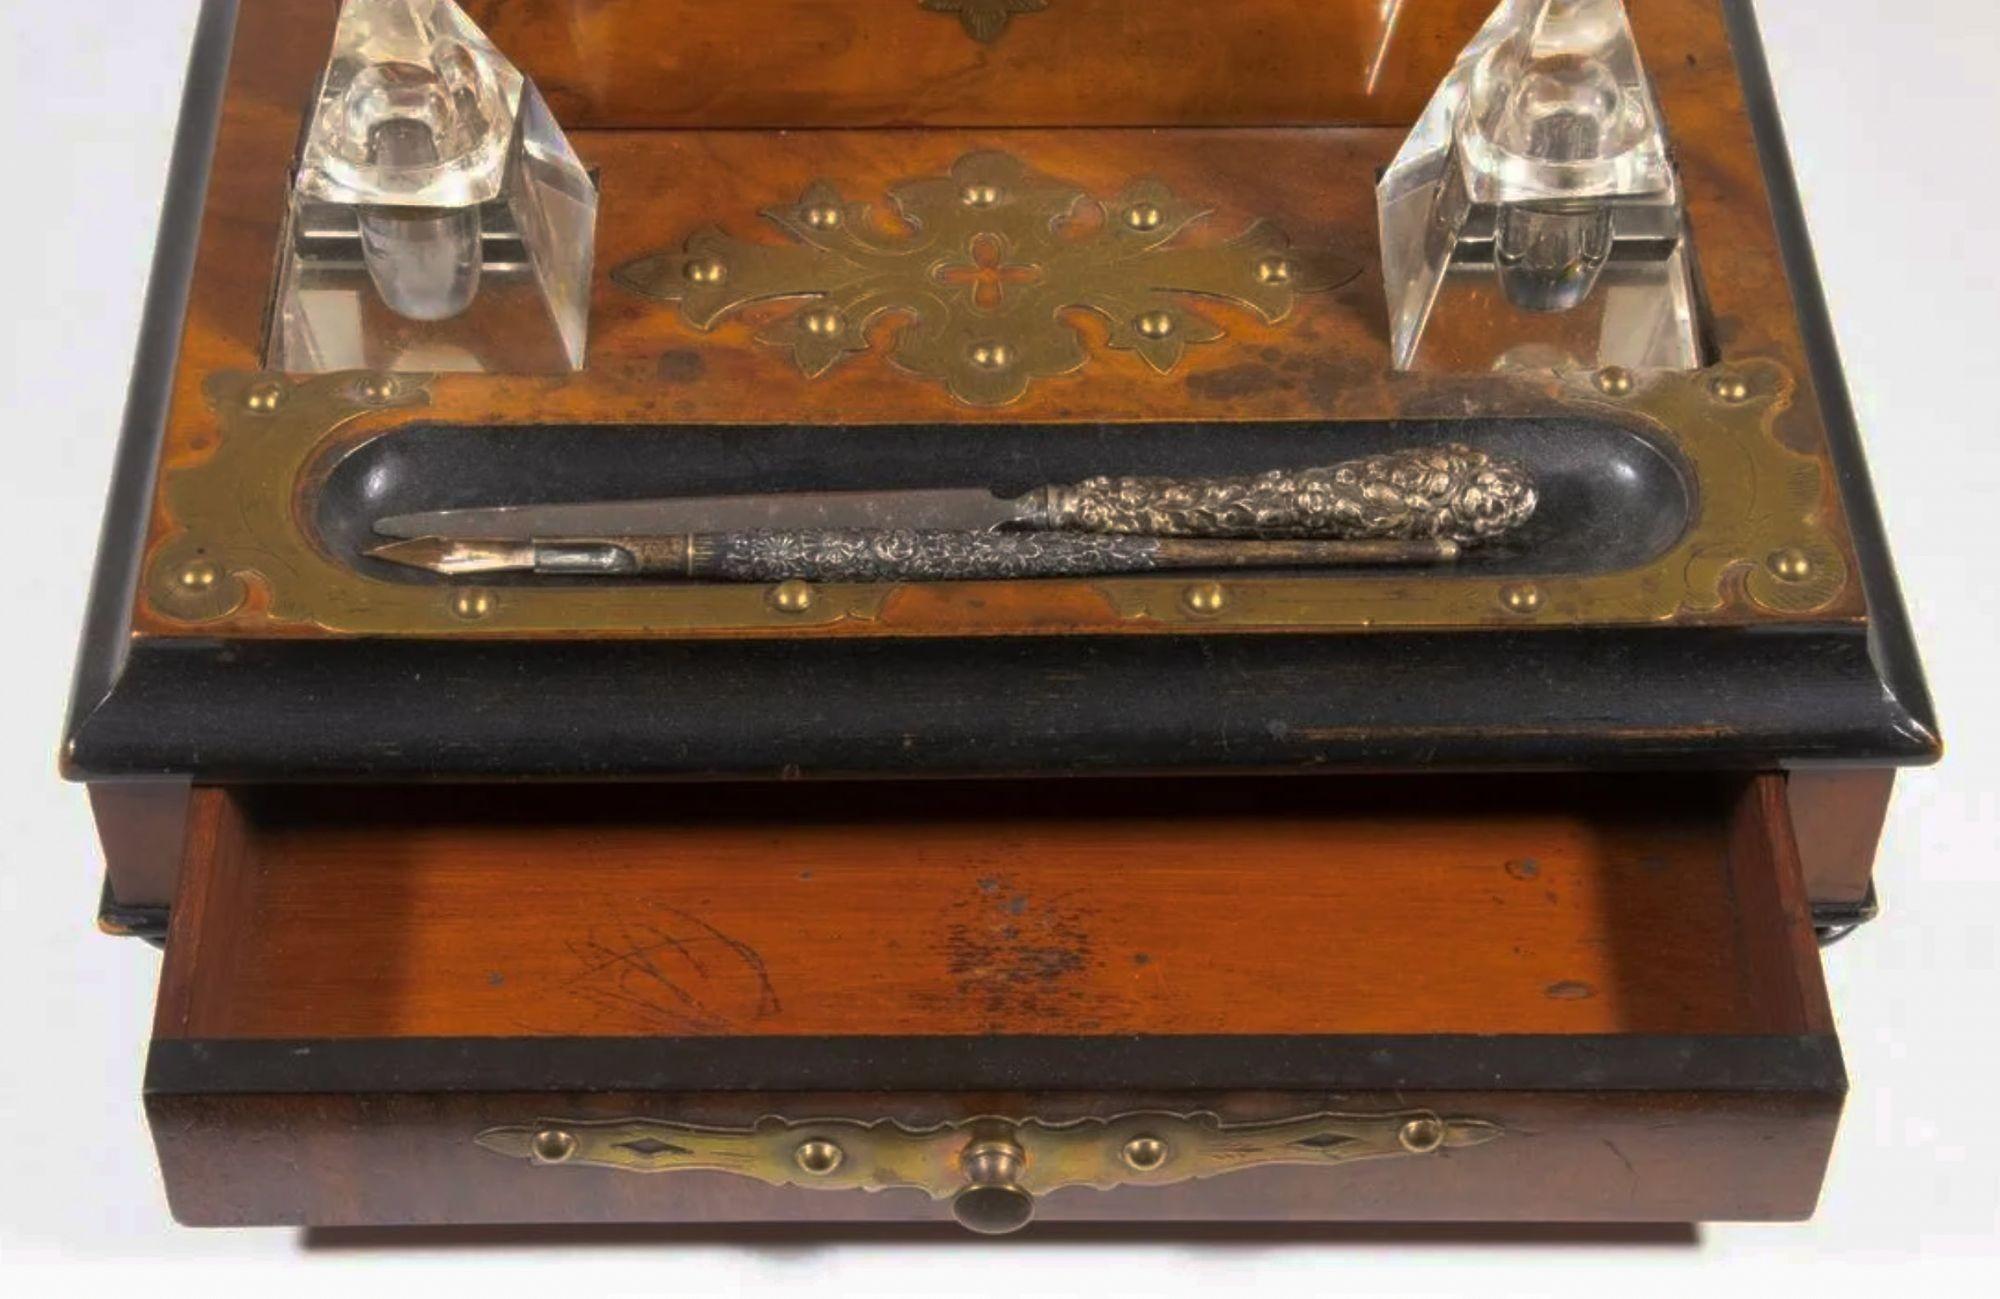 Late 19th century English stationary box and inkstand, consisting of a stationary box with hinged lid and interior fitted with silk covered insert, set on an inkstand with two clear crystal ink bottles and pen well with sterling handled letter